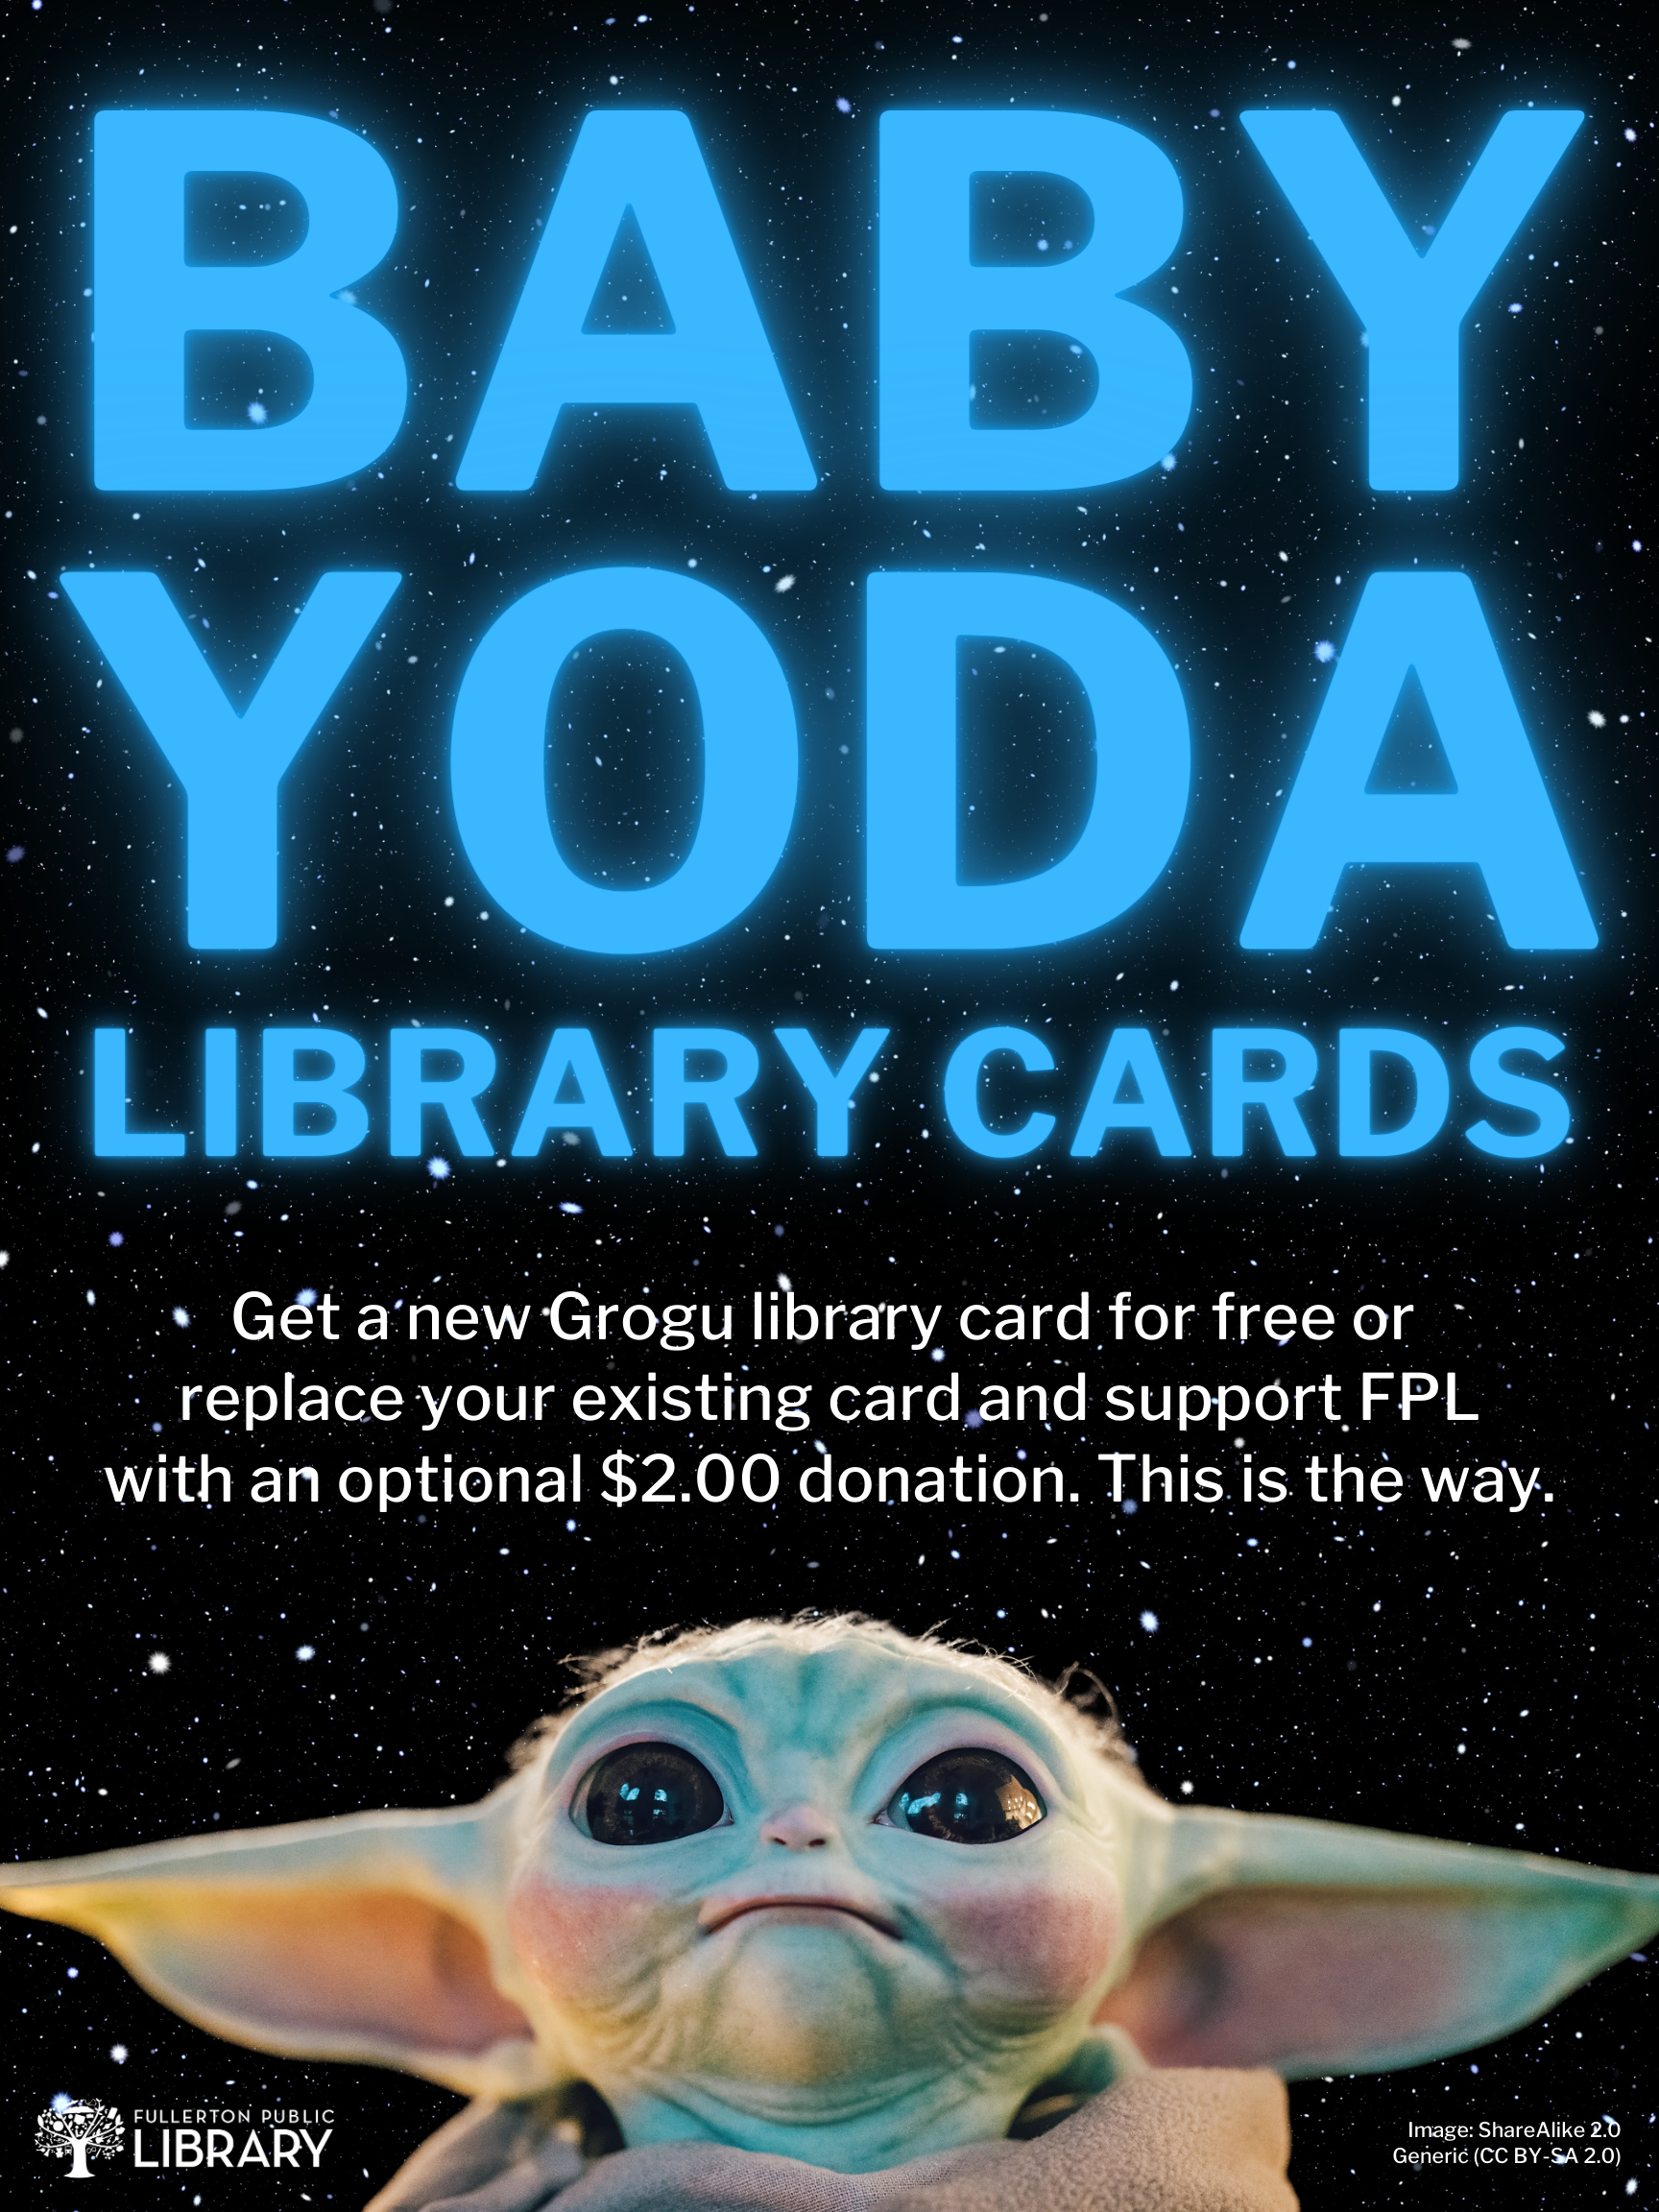 Star Wars Month - Baby Yoda library cards, events, and more!